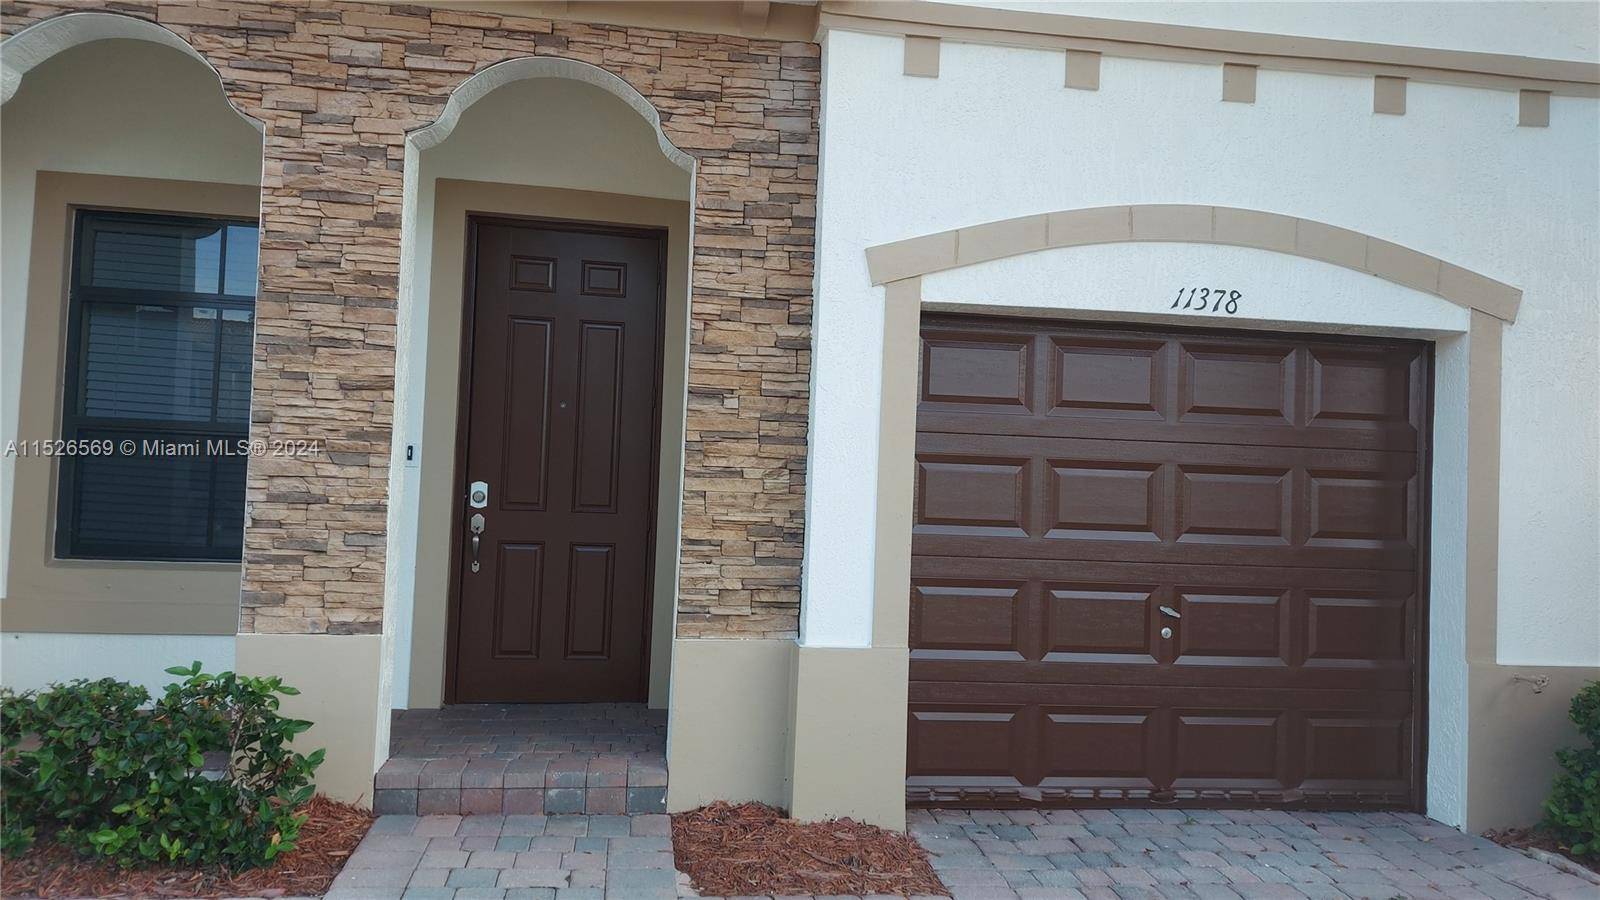 This Beautiful Corner Townhome, has the BEST Price for a Quick Sale !